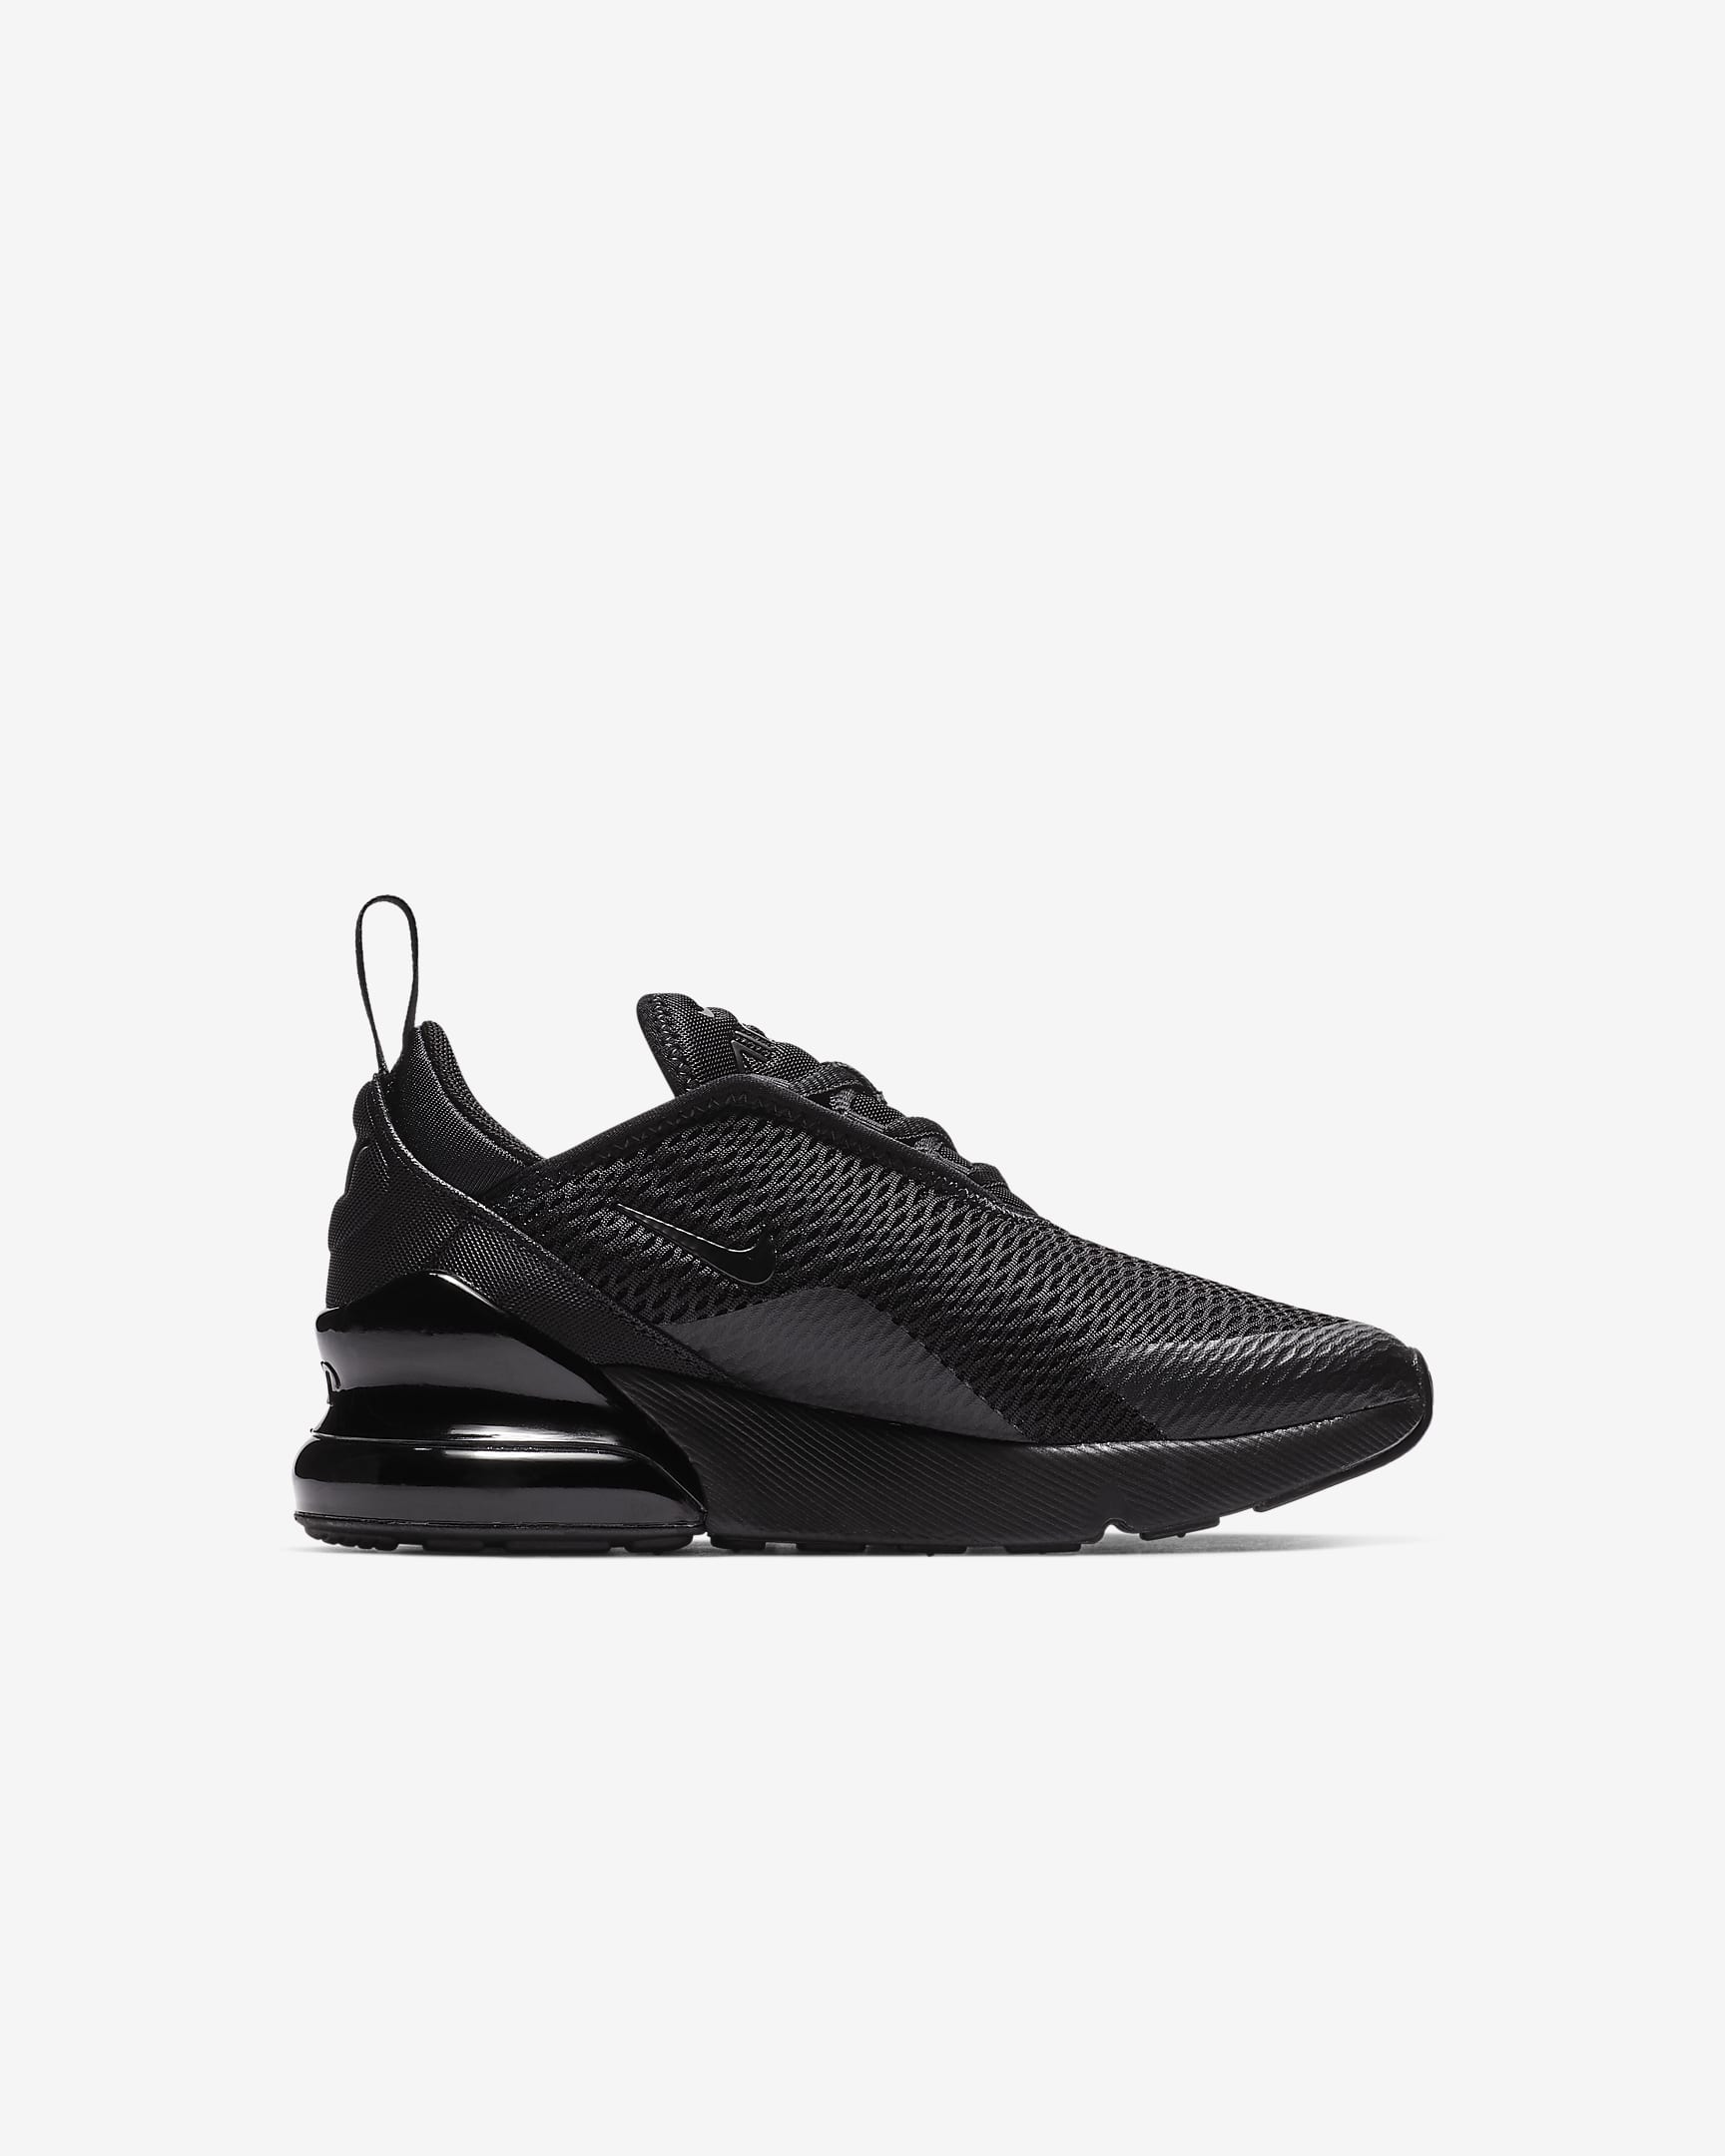 Improve every step: The Nike Air Max 270 - StyleVentures